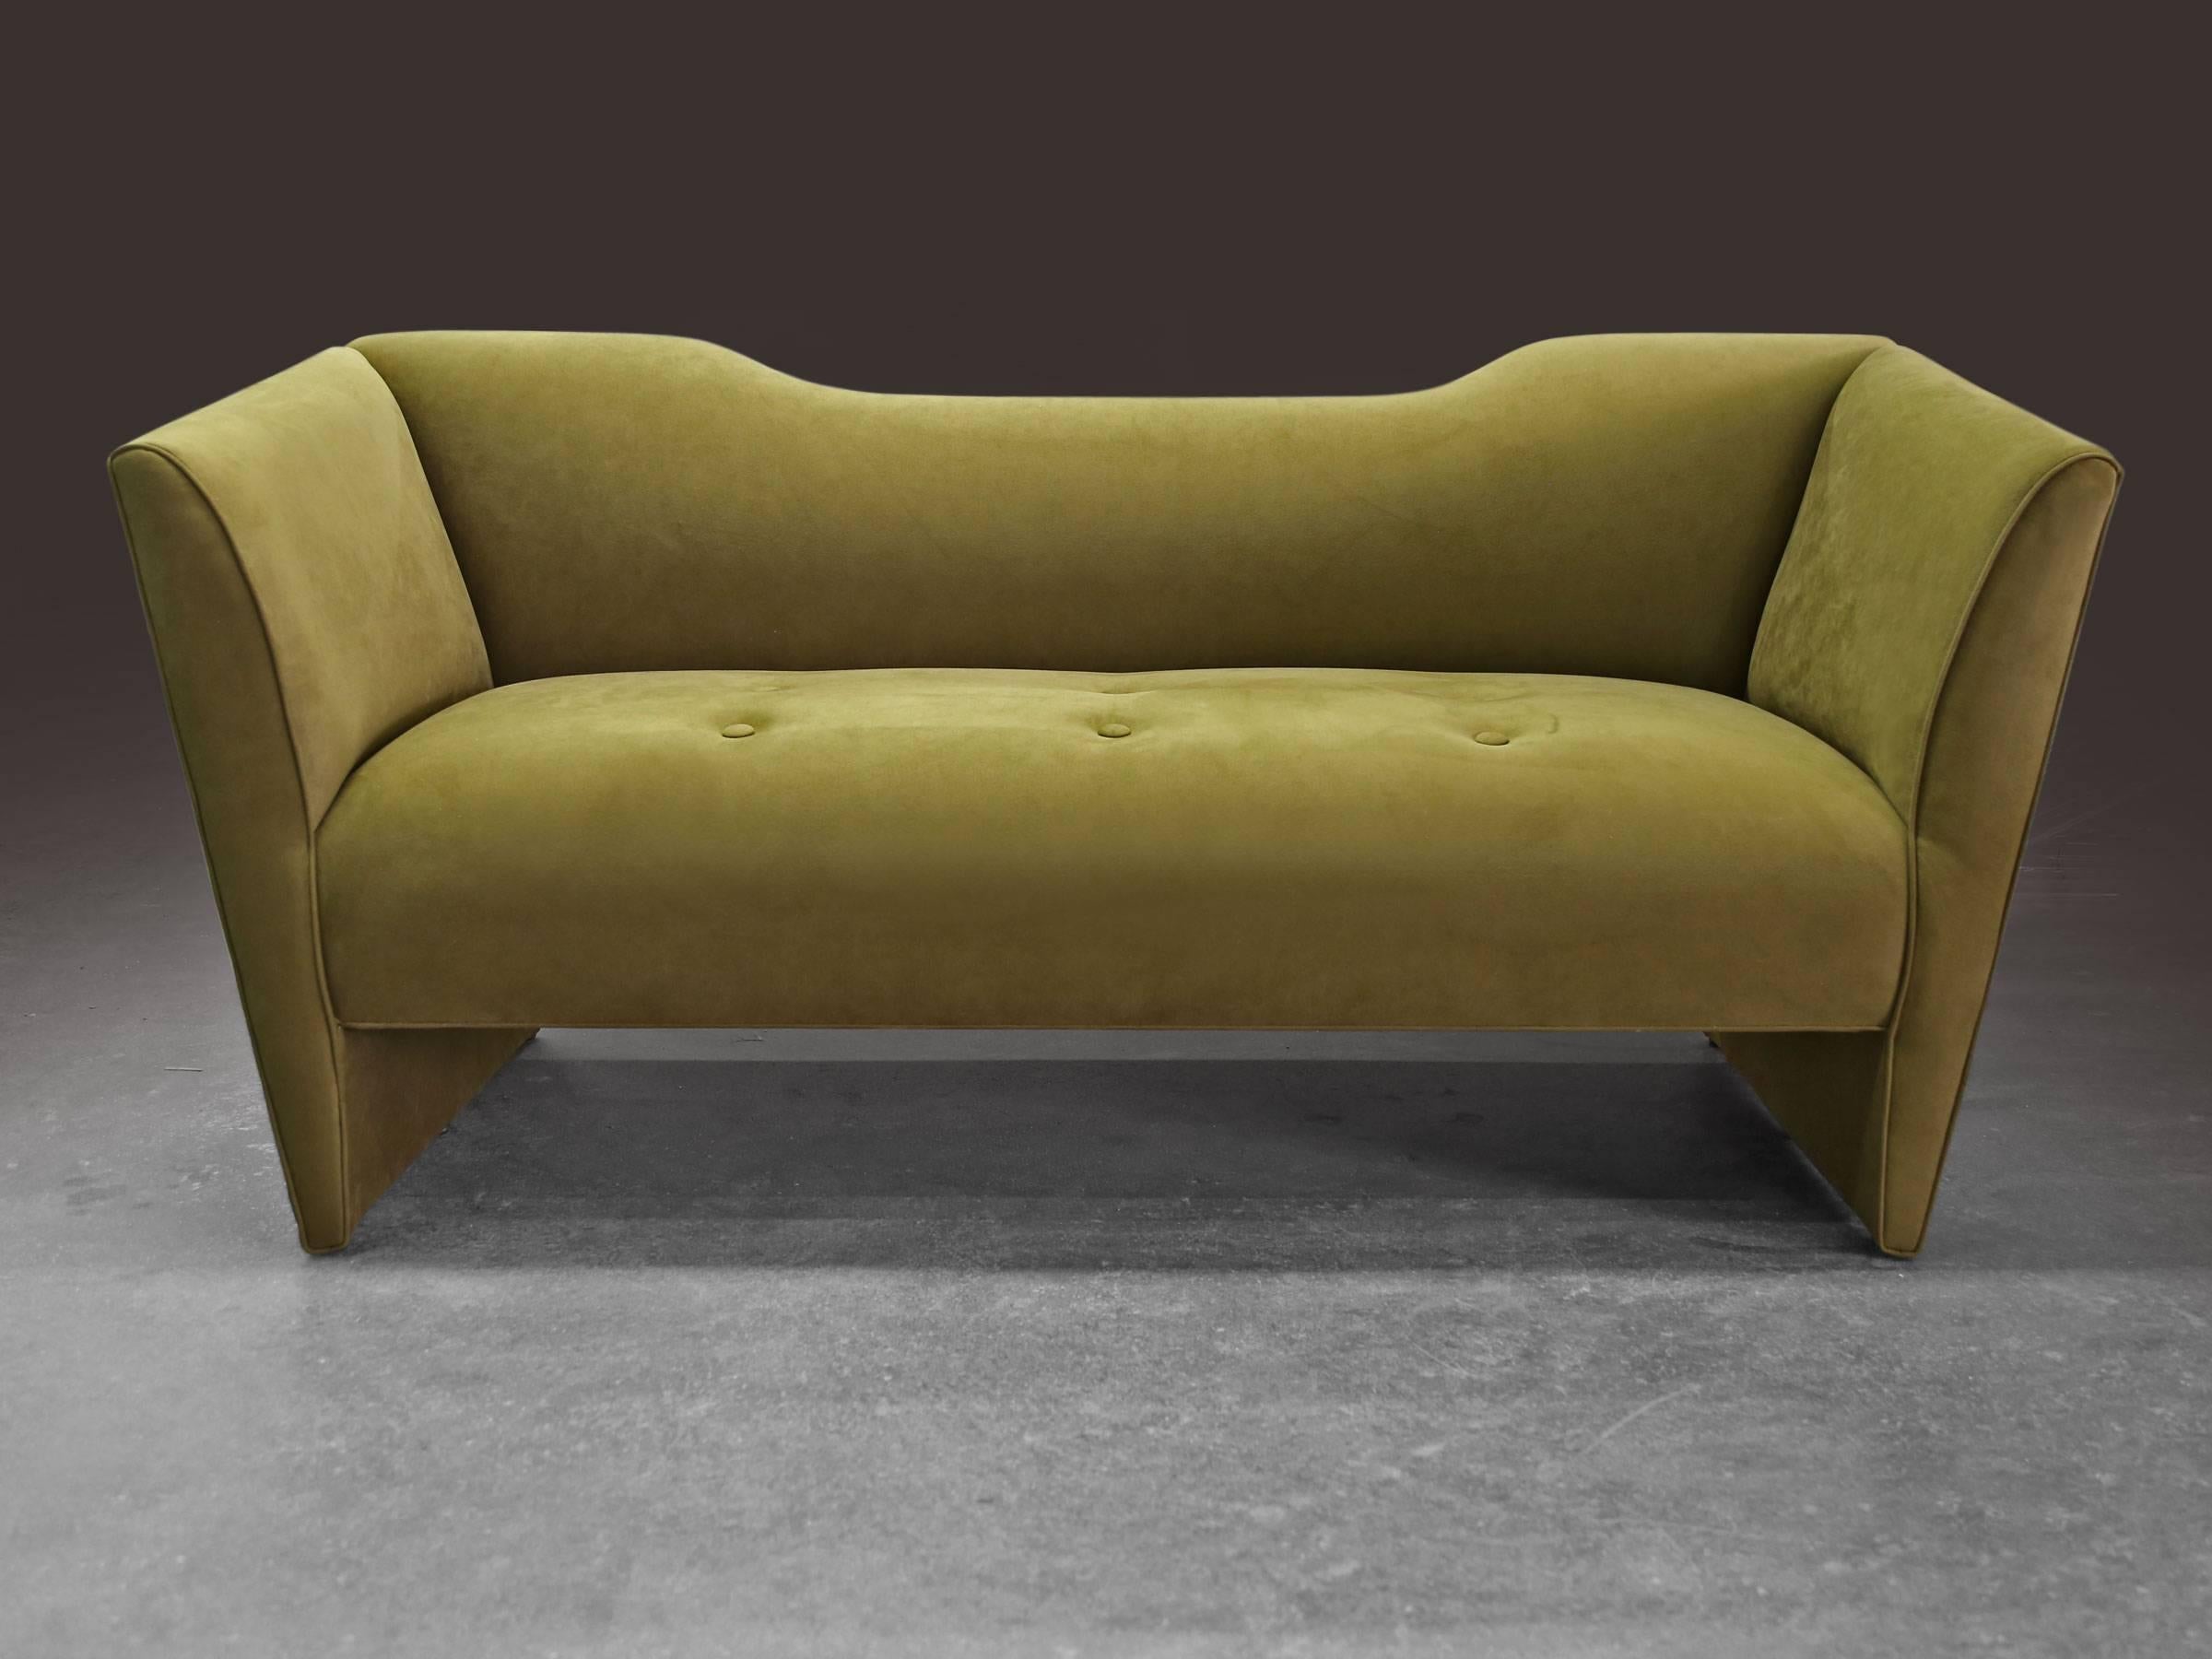 This unconventional sofa is completely covered in upholstery, all the way down to the legs. Its sensuous lines are refined and the seat, back and arms seem to leap upward and outward from the base for an attractive post modern Memphis-inspired